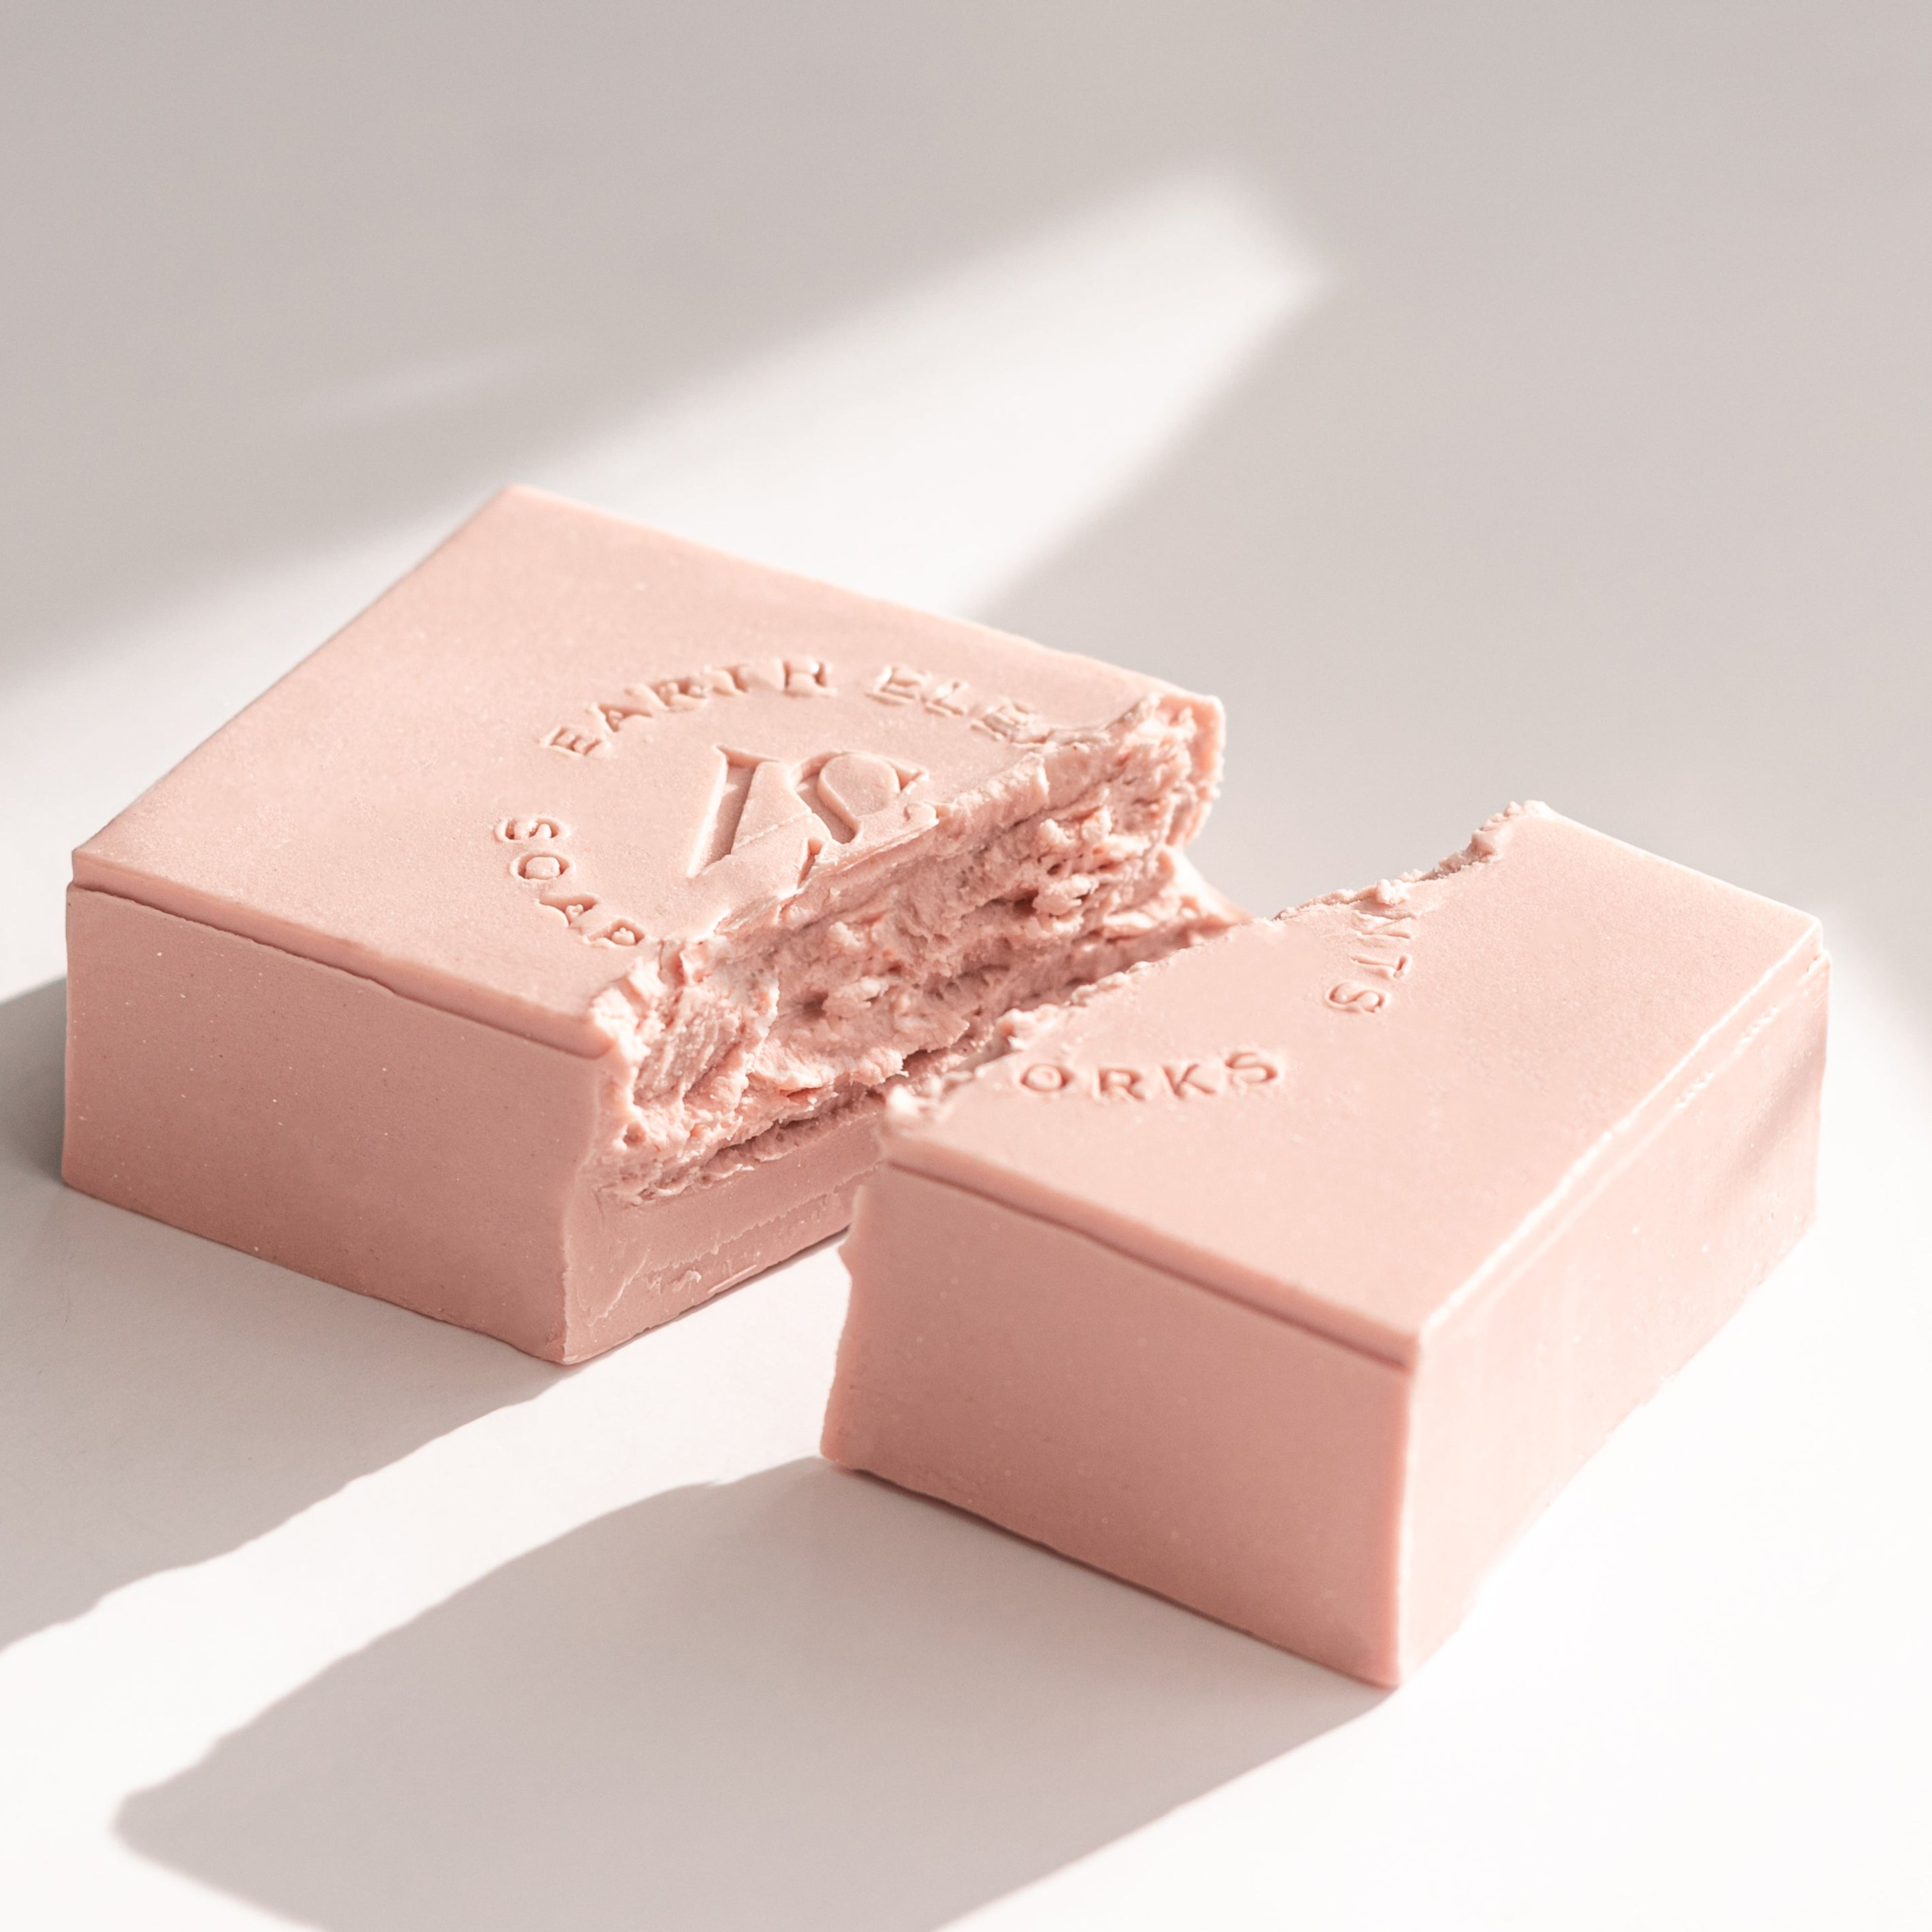 JUNIPER + GRAPEFRUIT WITH FRENCH ROSE CLAY SOAP